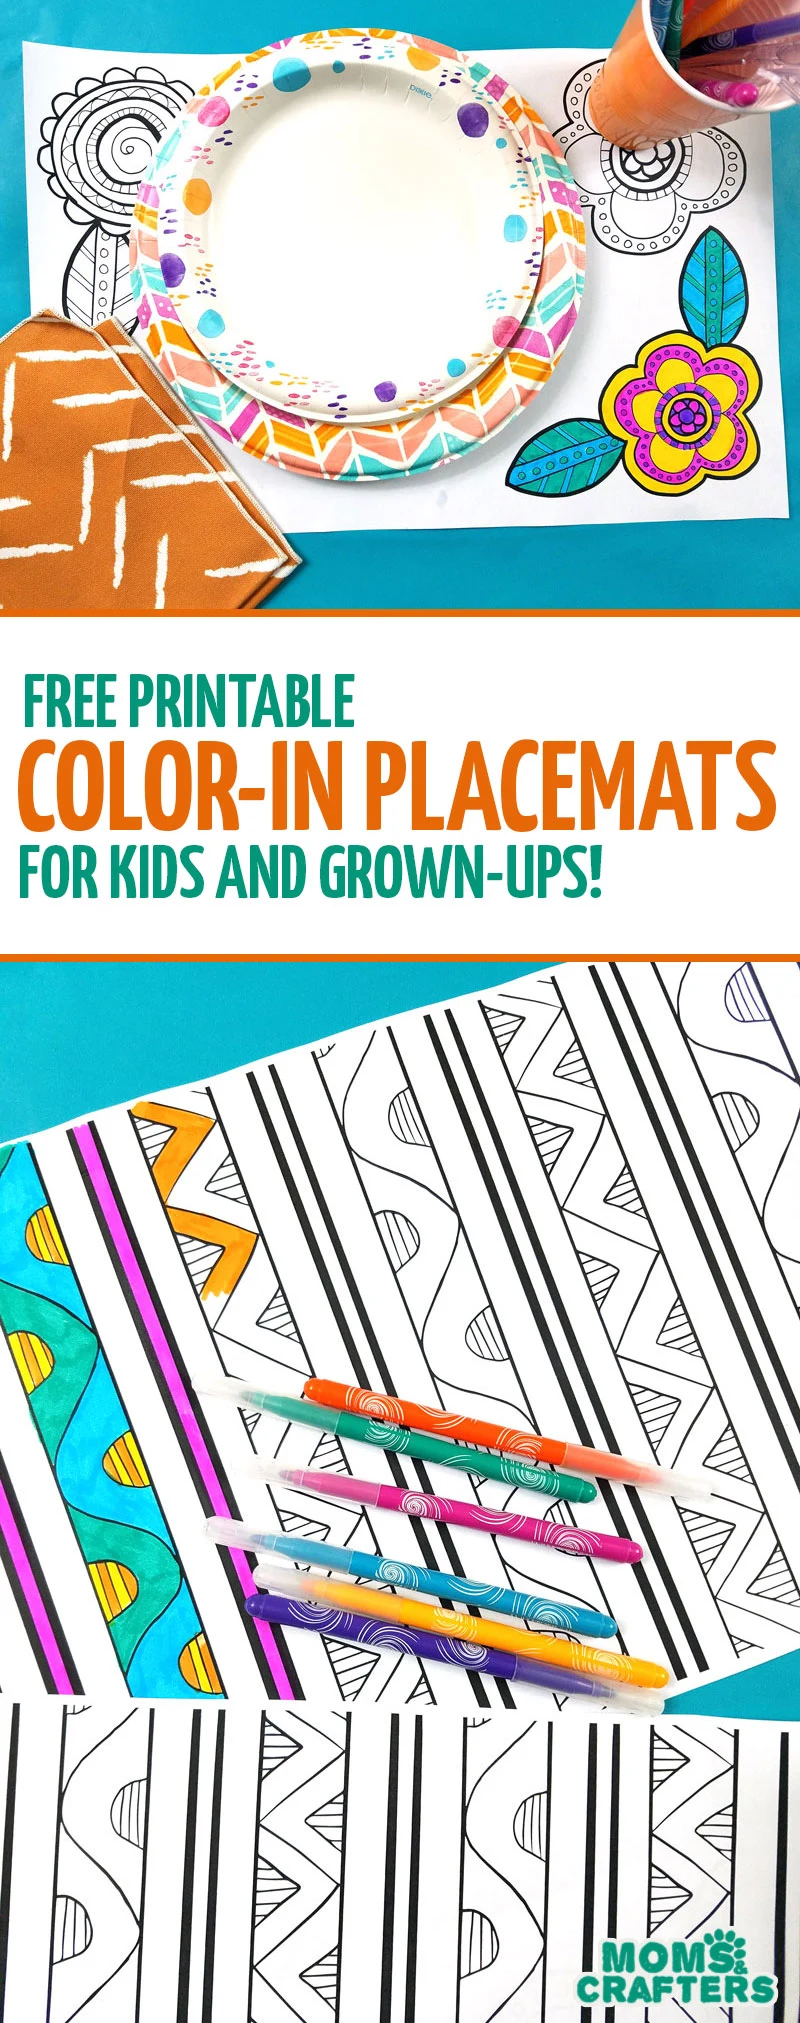 Download and print these free printable color-in placemats! These fun pattern and spring designs are perfect adult coloring pages - and simple enough fo big kids, teens, and tweens! What a fun spring or summer picnic idea! #picnic #adultcoloring #momsandcrafters